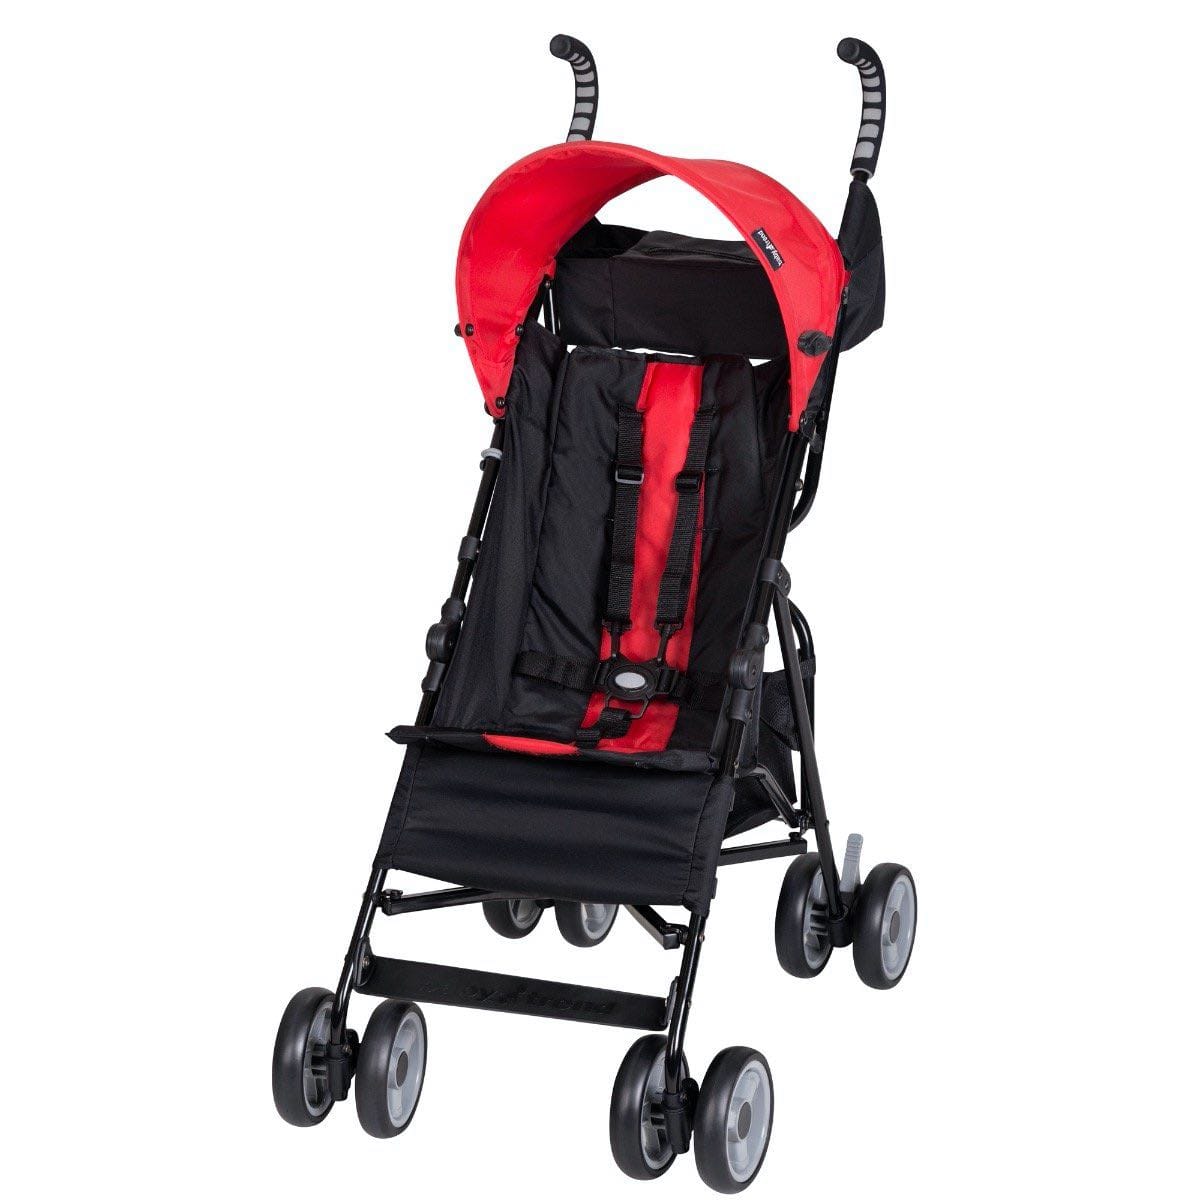 Baby Trend Rocket Lightweight Stroller, Princeton, Black 50lbs Dual foot activated parking brake and a parent organizer with 2 cup holders Large canopy and basket; Baby trend rocket stroller will accommodate your growing child up to 50 pounds- 9001402036